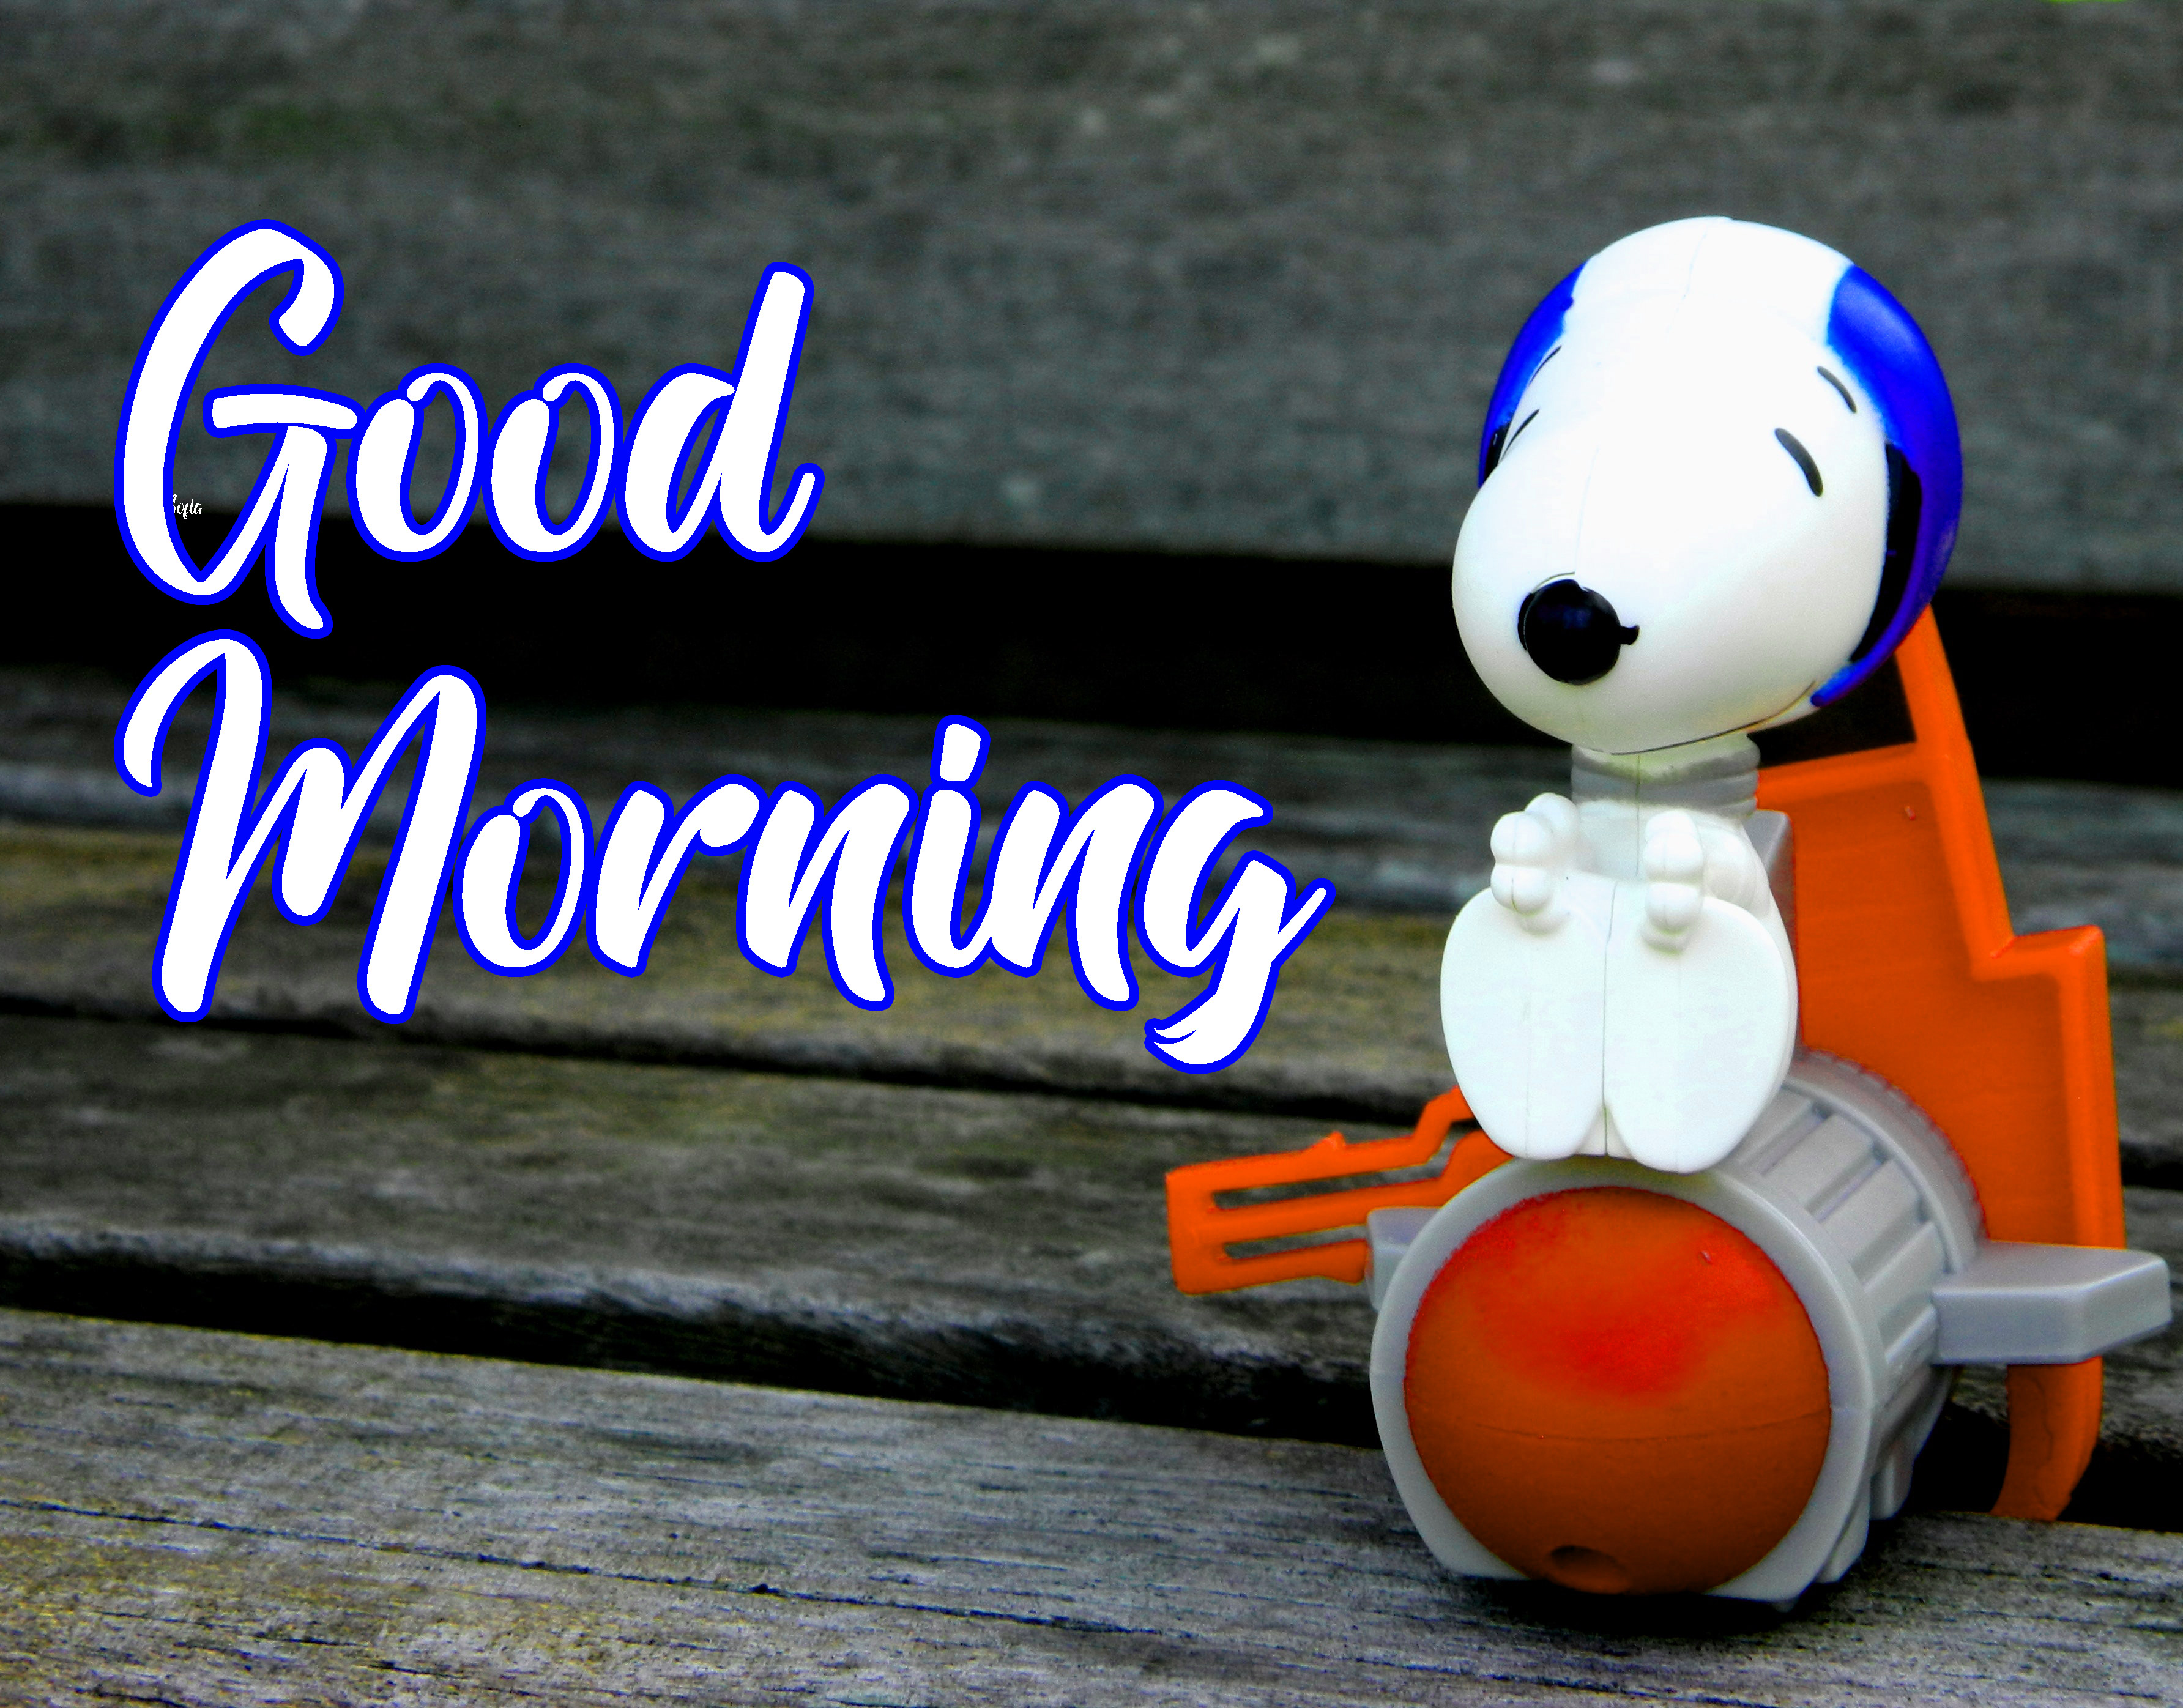 Snoopy Good Morning Wishes Wallpaper Free Download 